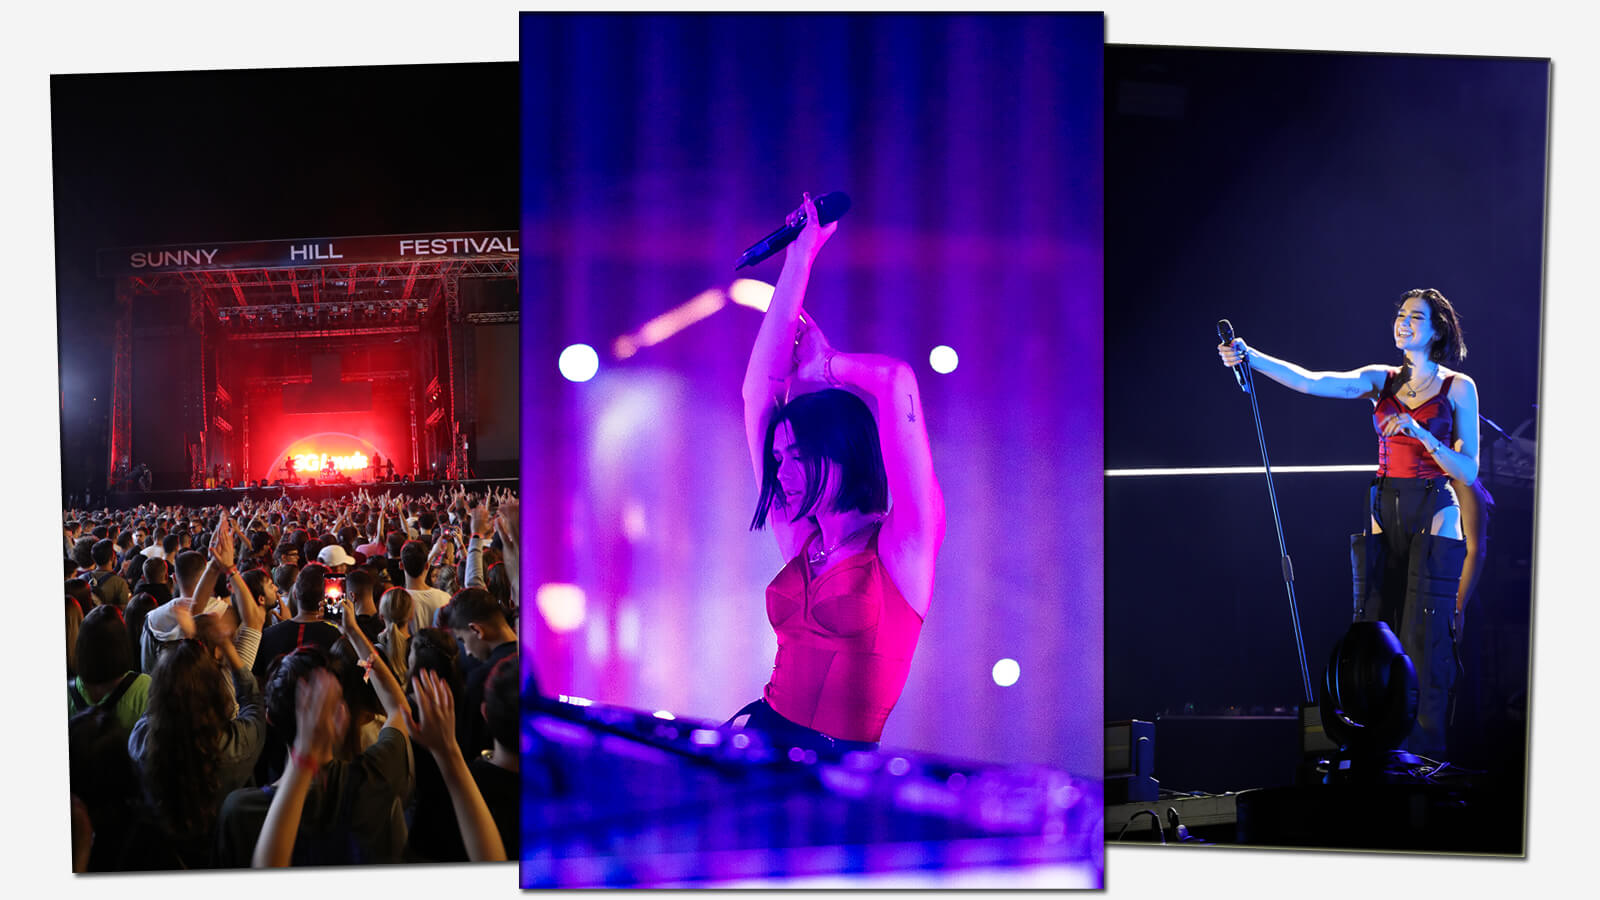 Images of Dua Lipa performing at Sunny Hill Festival